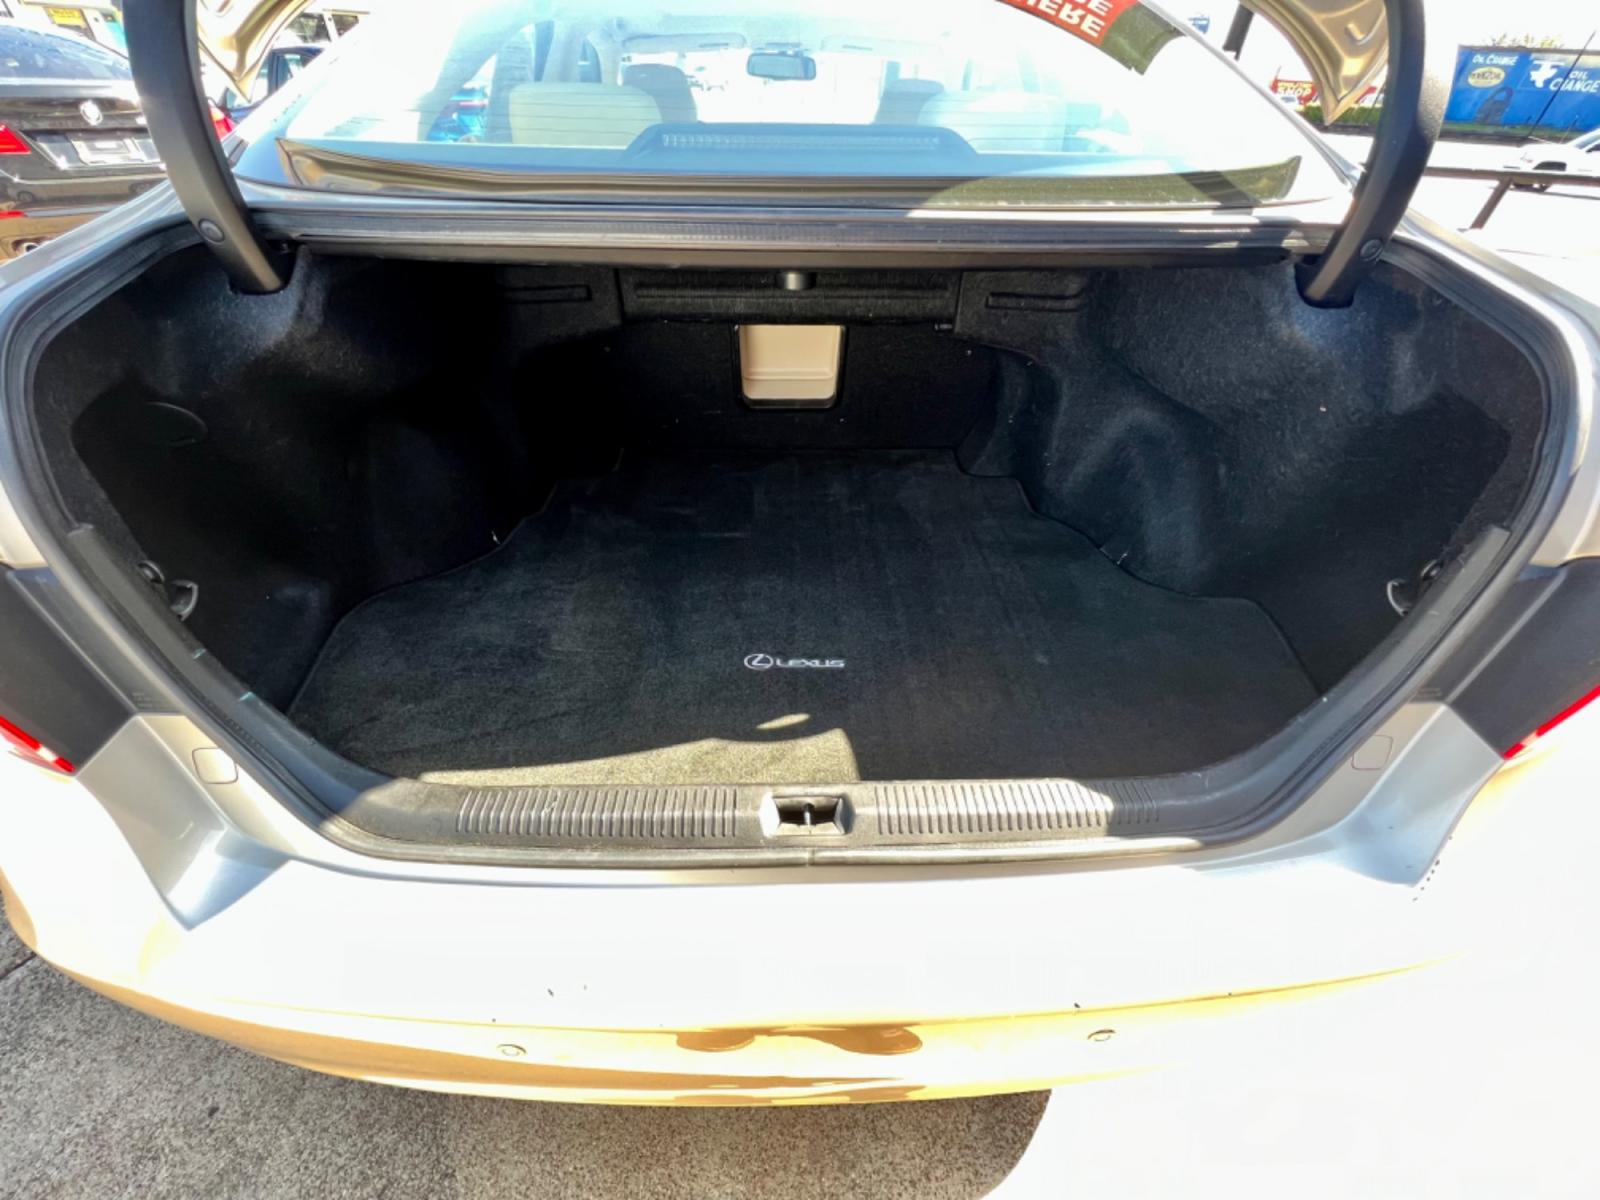 2011 GOLD LEXUS ES 350 (JTHBK1EG9B2) , located at 5900 E. Lancaster Ave., Fort Worth, TX, 76112, (817) 457-5456, 0.000000, 0.000000 - This is a 1 OWNER, 2011 LEXUS ES 350 4 DOOR SEDAN that is in excellent condition. There are no dents or scratches. The interior is clean with no rips or tears or stains. All power windows, door locks and seats. Ice cold AC for those hot Texas summer days. It is equipped with a CD player, AM/FM radio - Photo #22